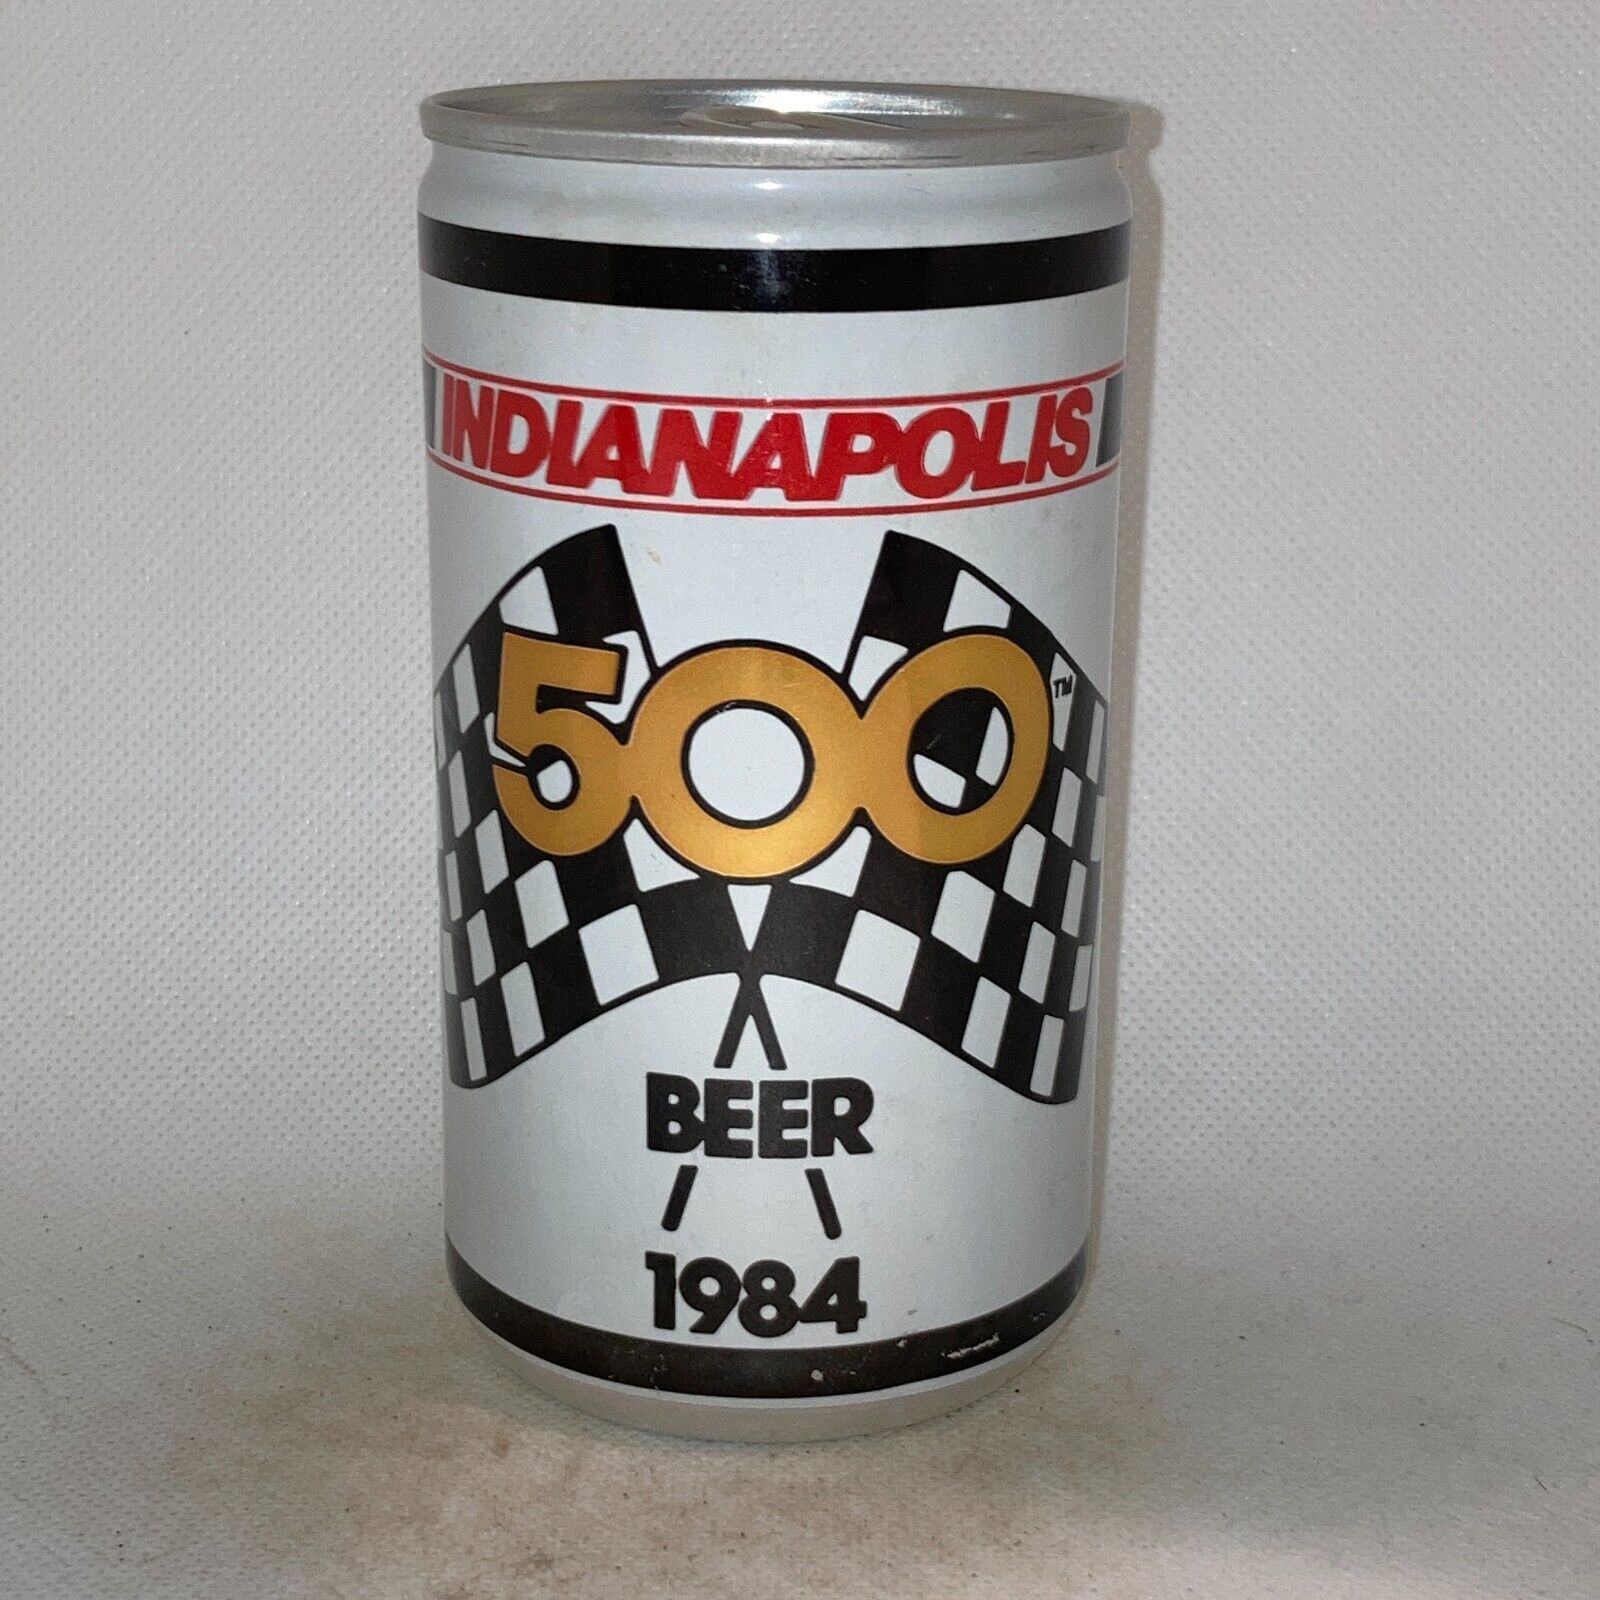 1984 Indianapolis 500 beer can, bottom opened